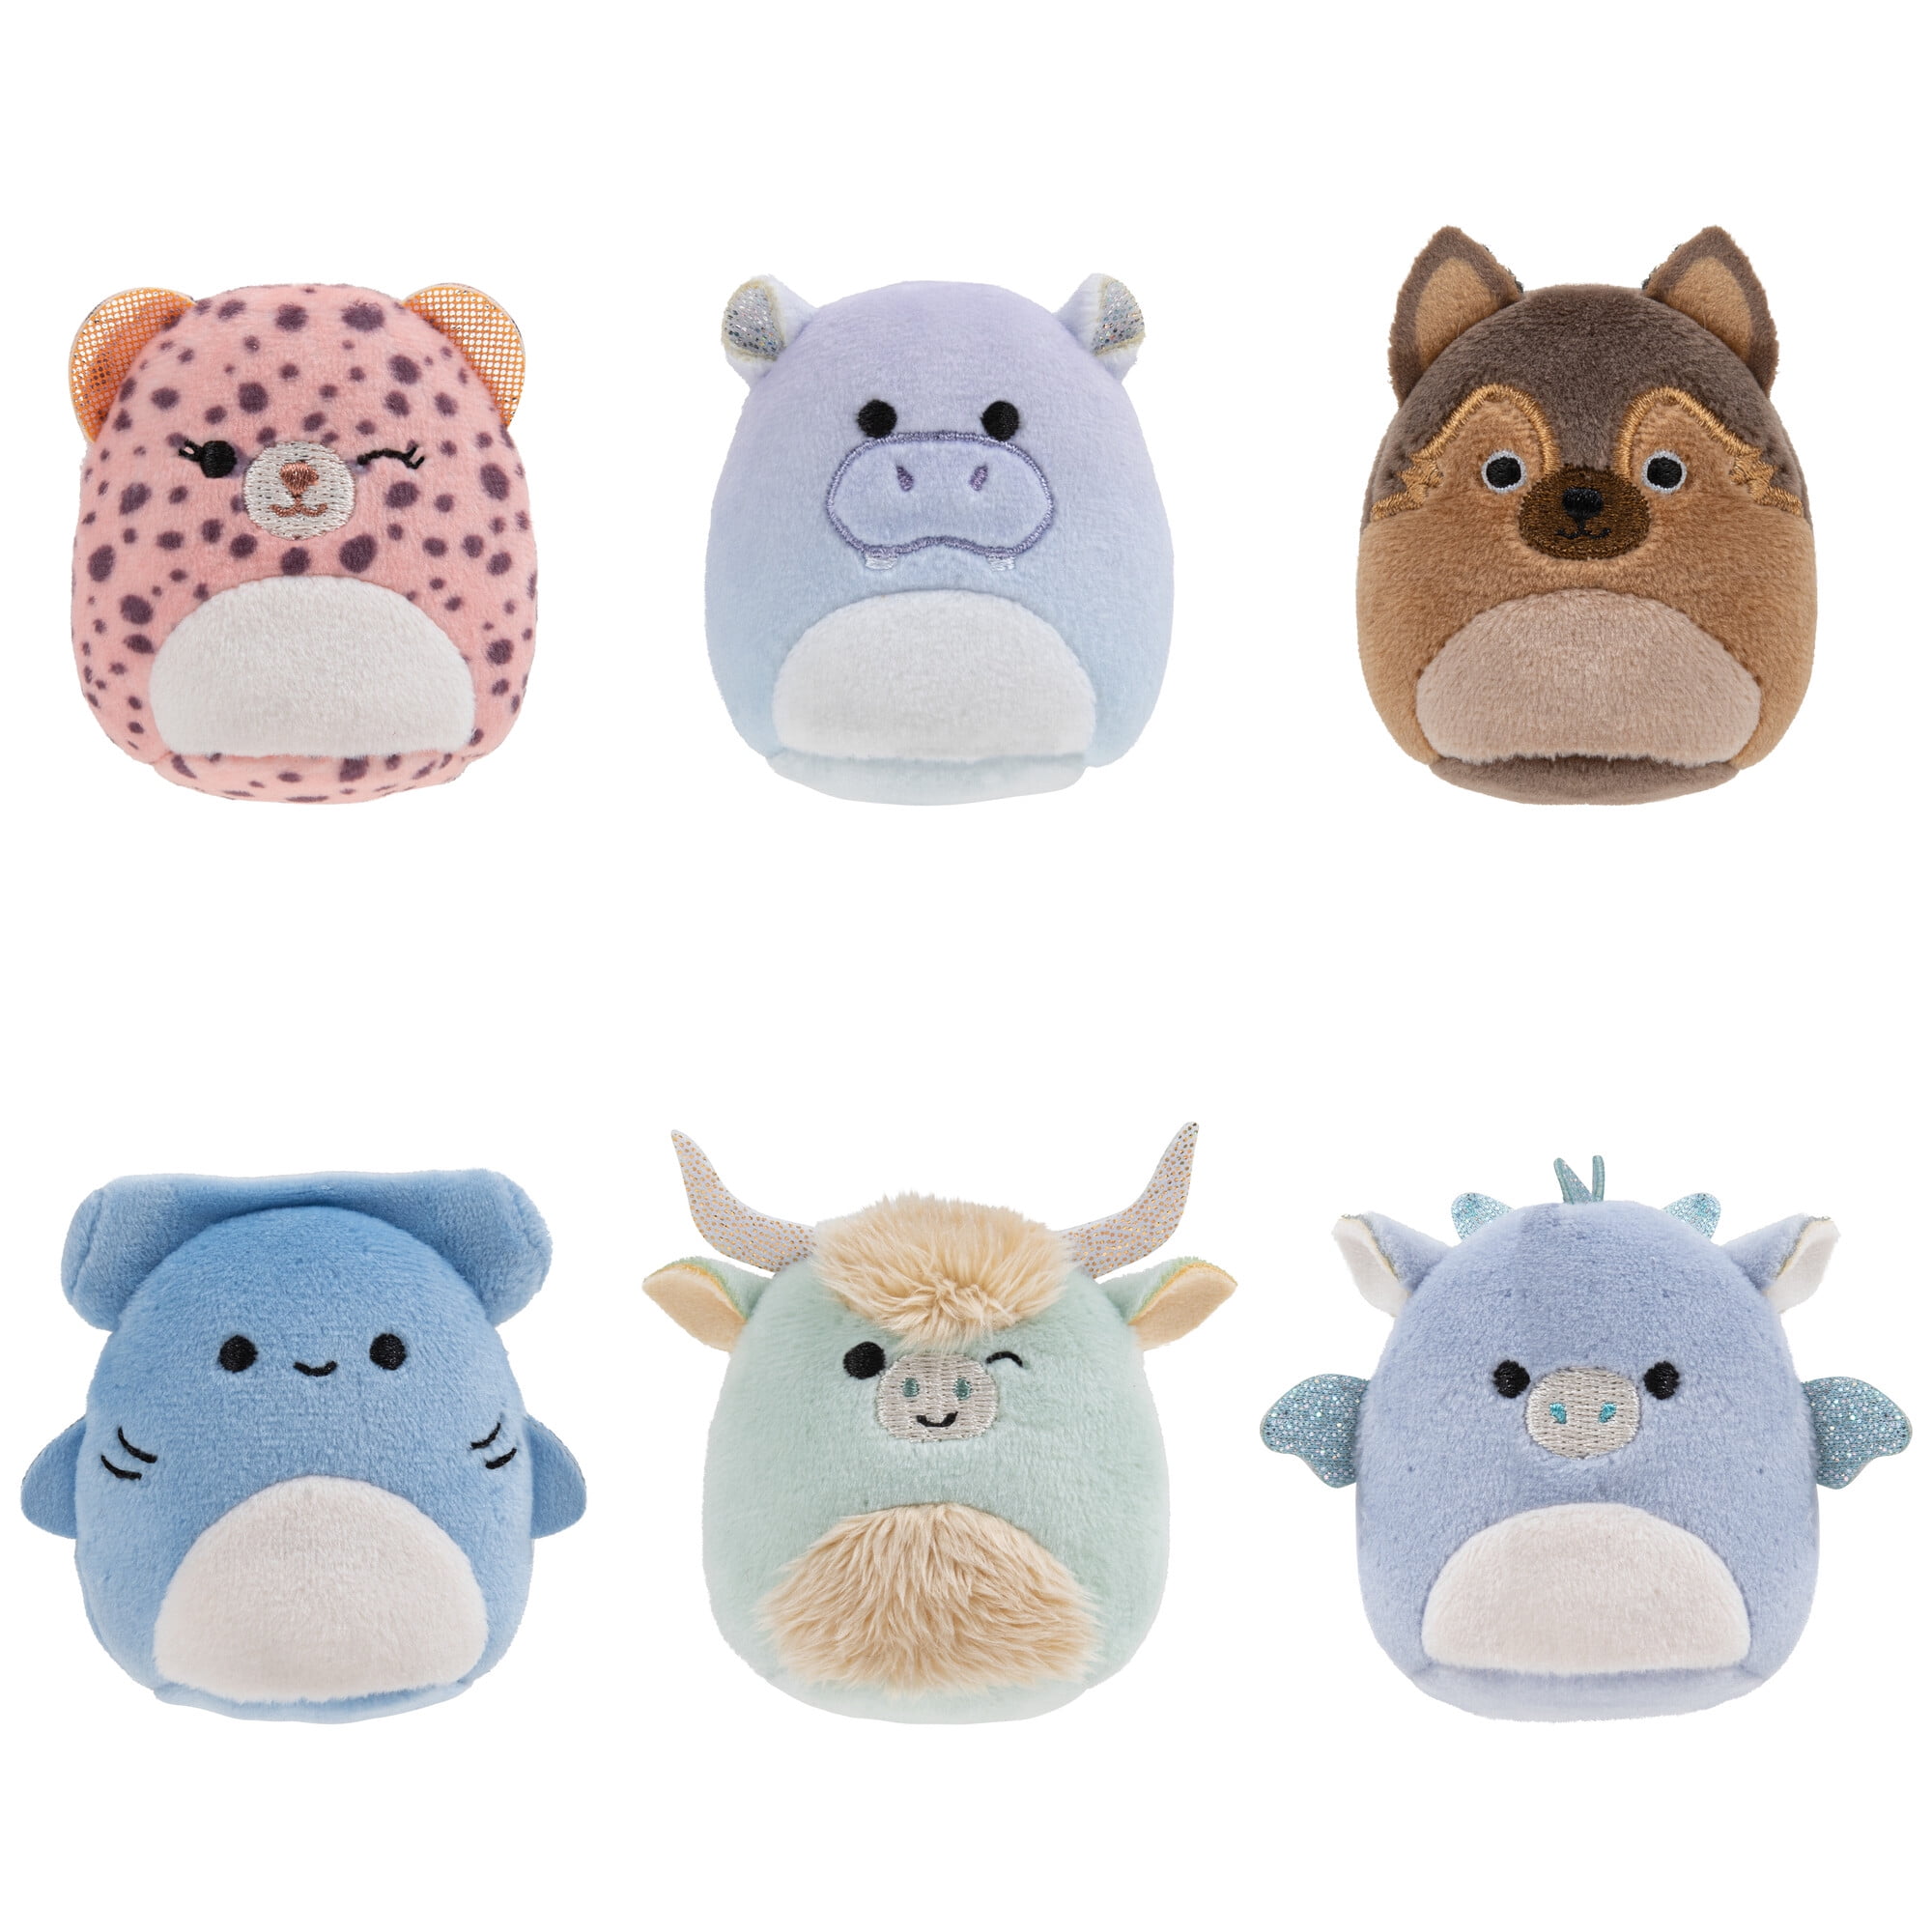 Squishville by Original Squishmallows Deluxe Academy Playset - Includes  2-Inch Eunice The Unicorn Plush, School Desk, Locker, and School Playscene  